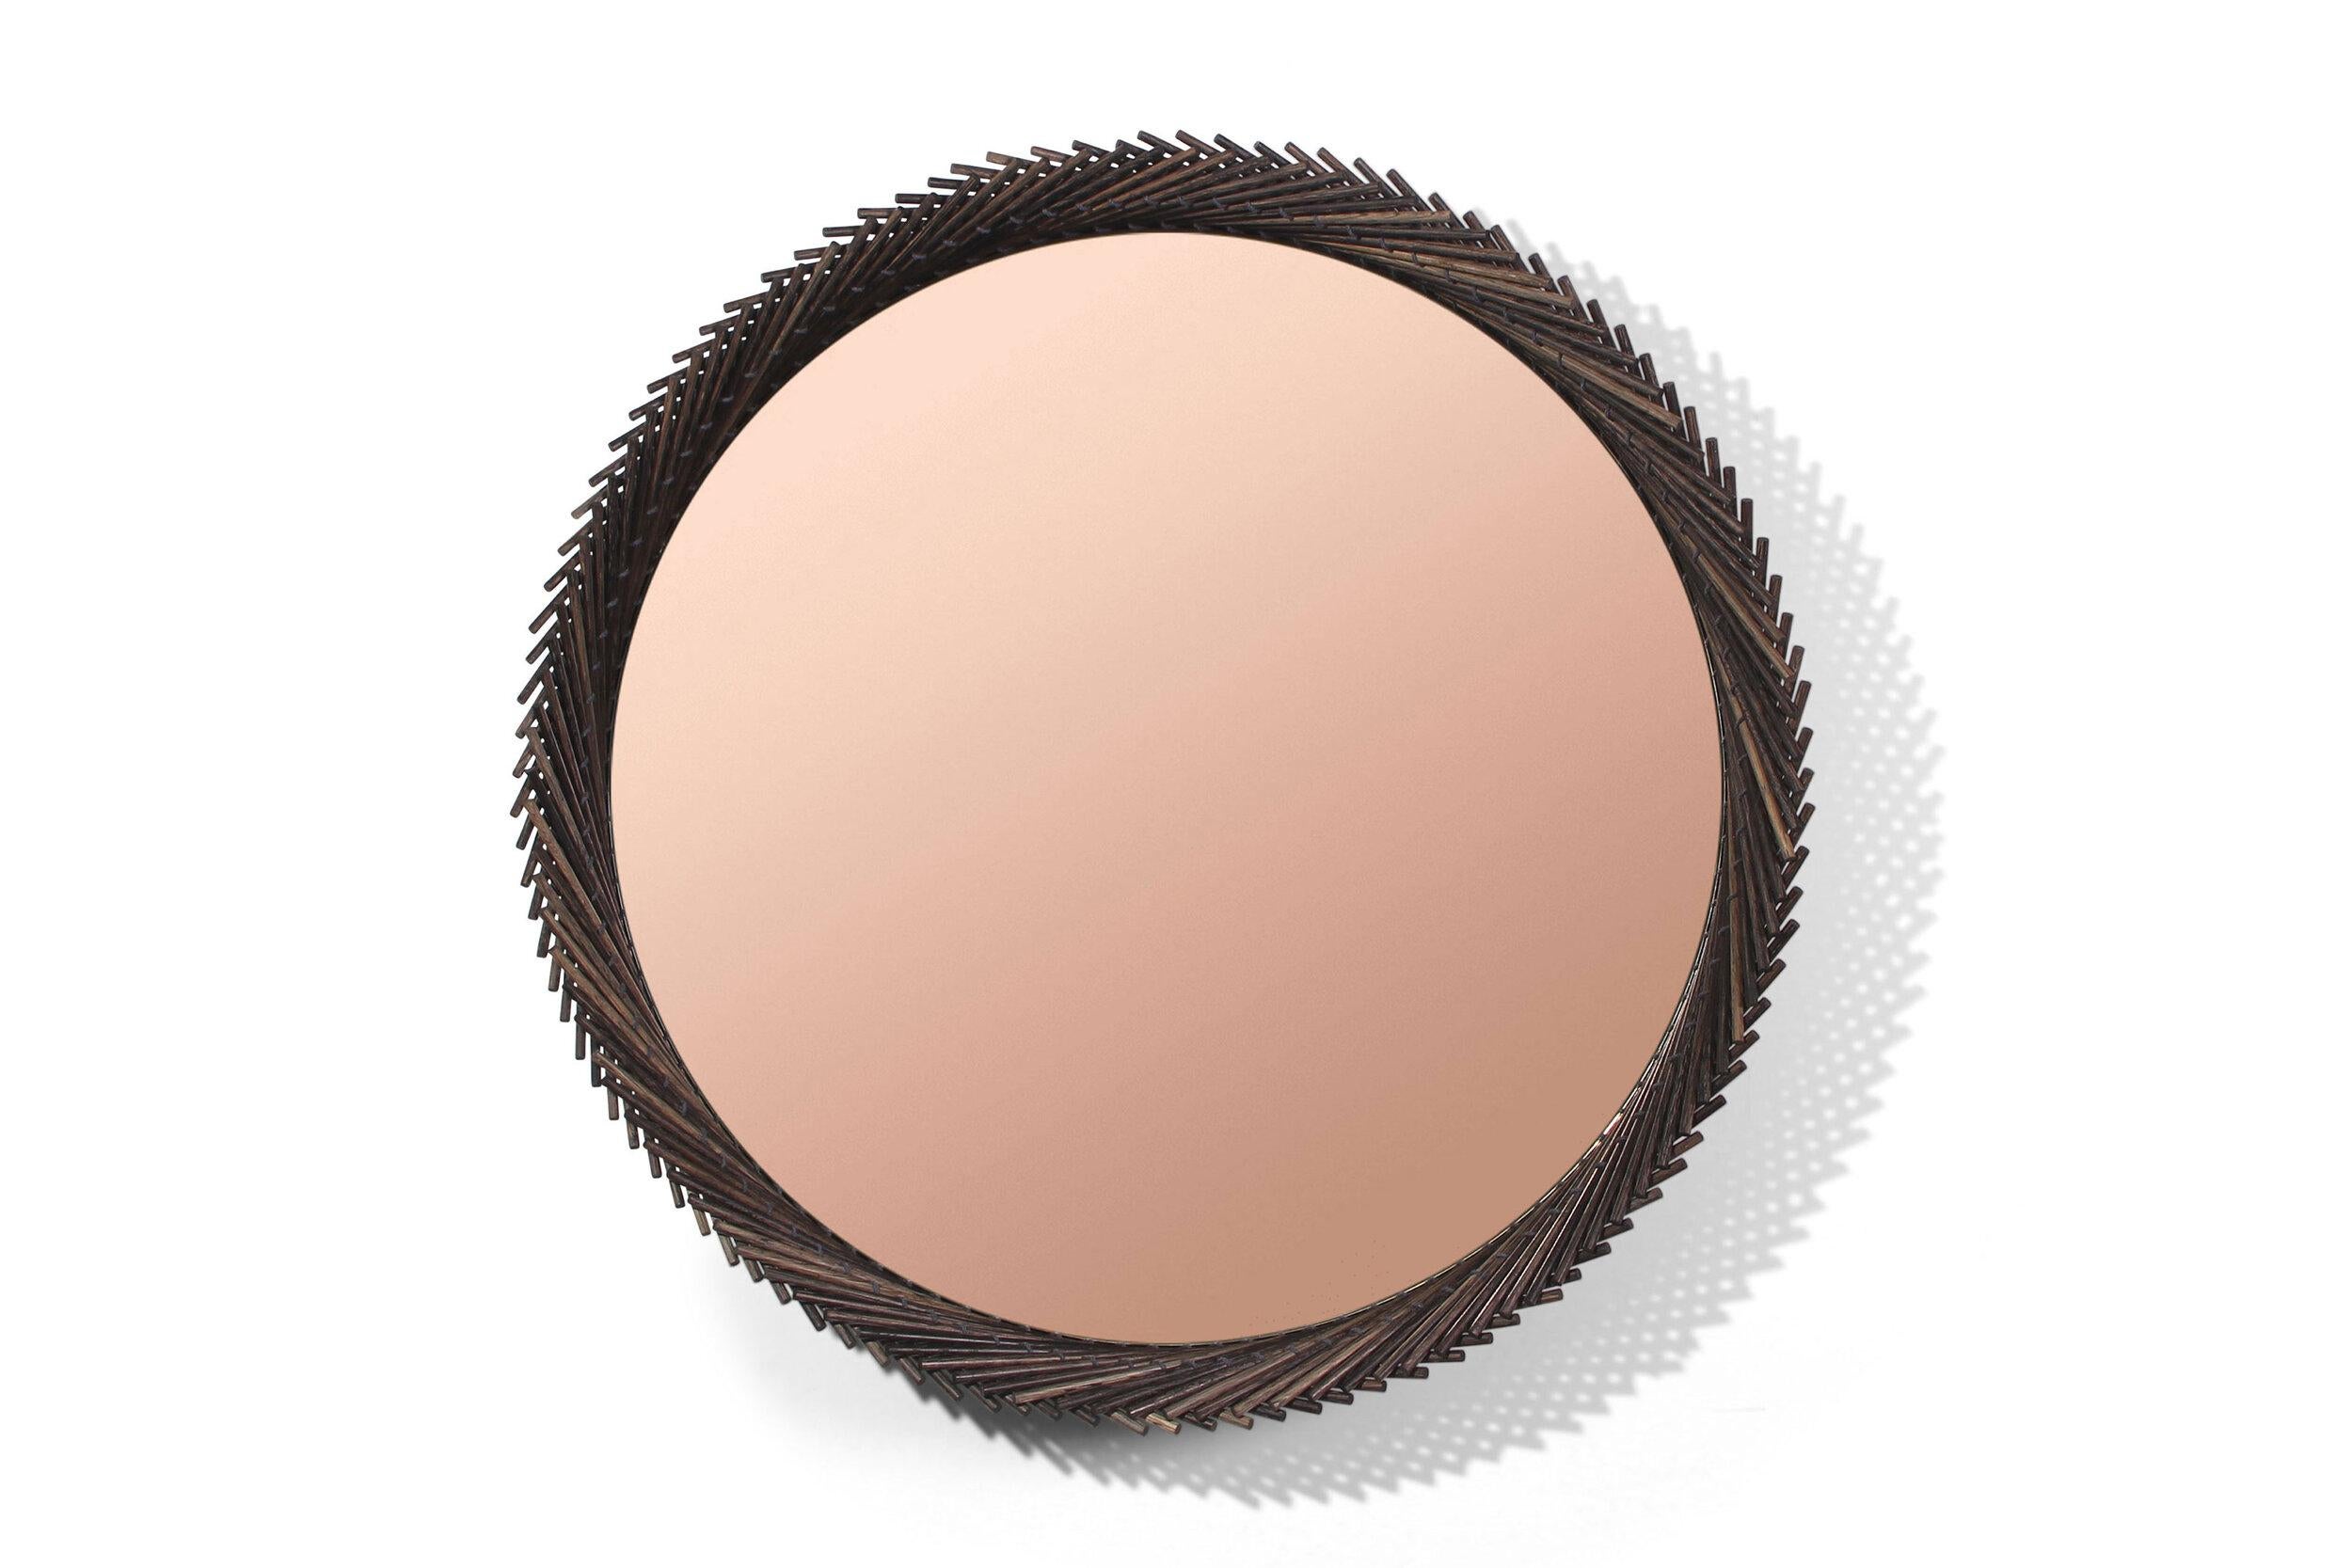 Mooda Maple Round mirror 18´ by Indo Made
One of a kind
Dimensions: Ø 73.7 x 10,2 cm
Materials: Oak, Bronze Tinted Mirror

Also available in other dimensions and materials. Please contact us.
Ø options: 73.7 cm, 88.9 cm and 106.7 cm.
Material